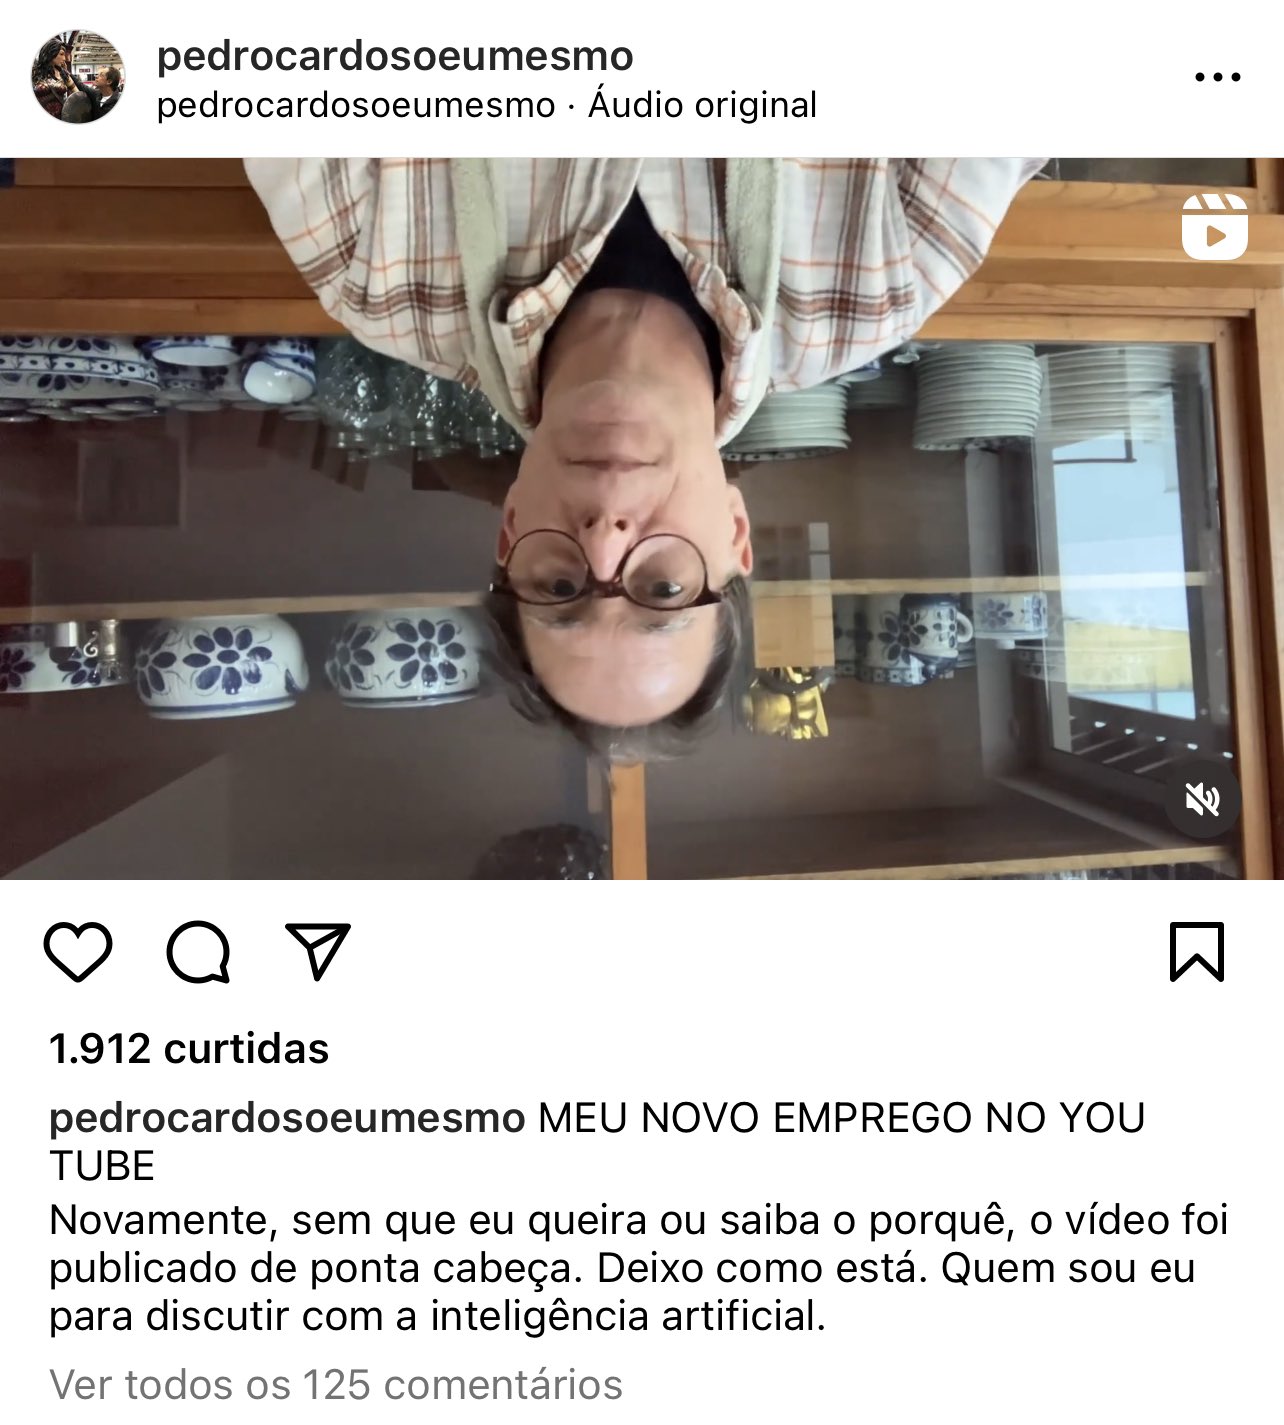 Pedro Cardoso on ranting on instagram because his picture only shows upside down